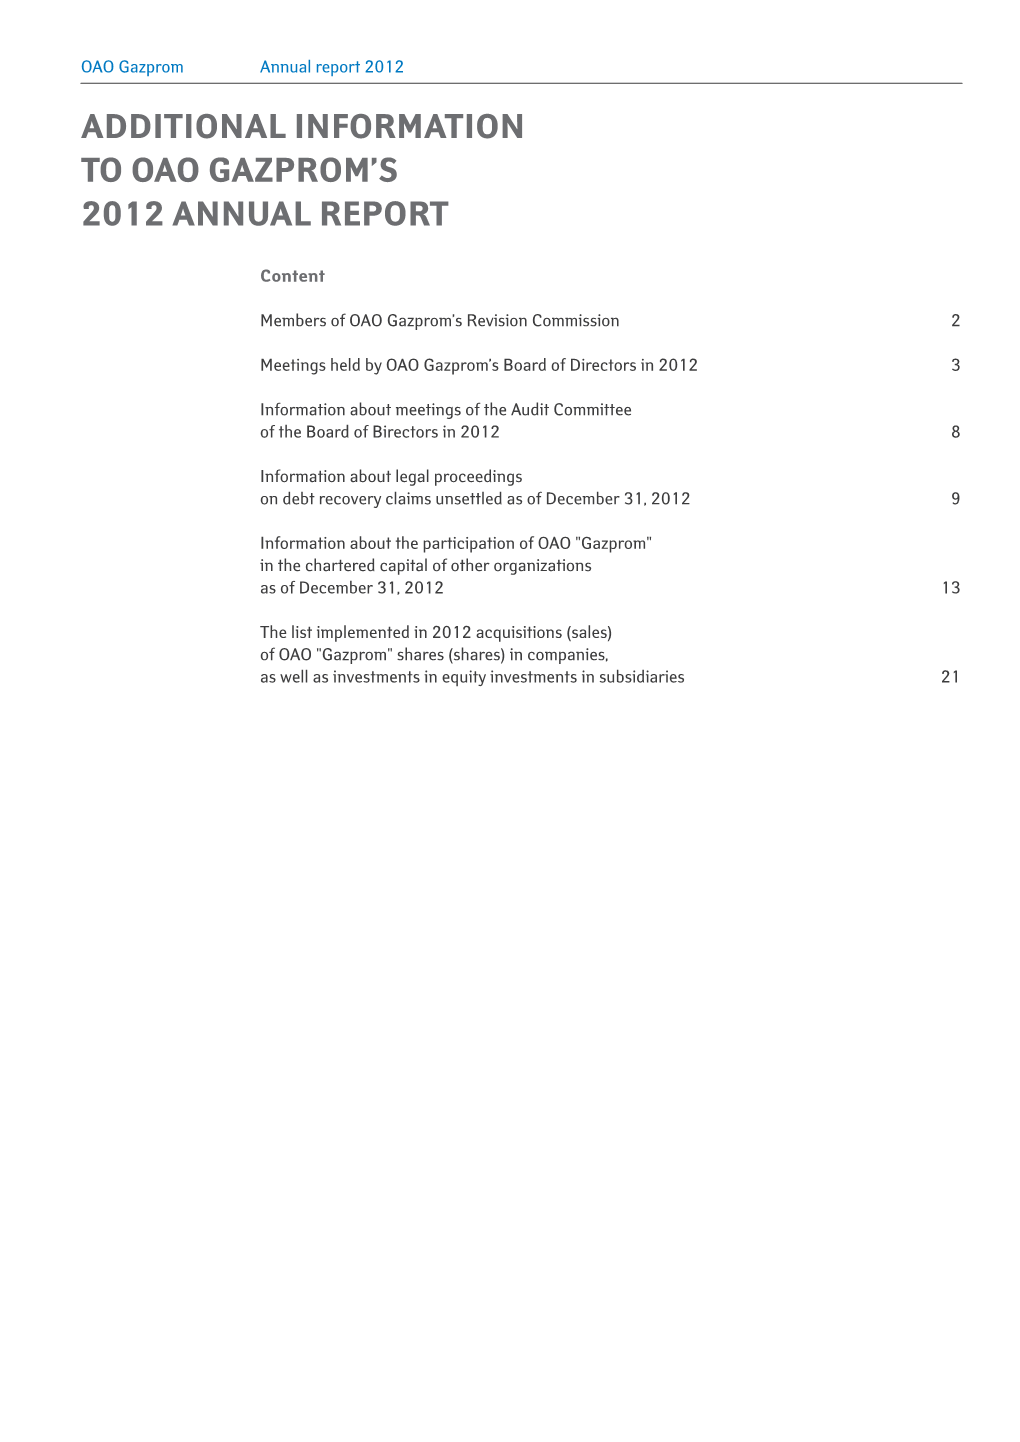 Additional Information to Oao Gazprom's 2012 Annual Report